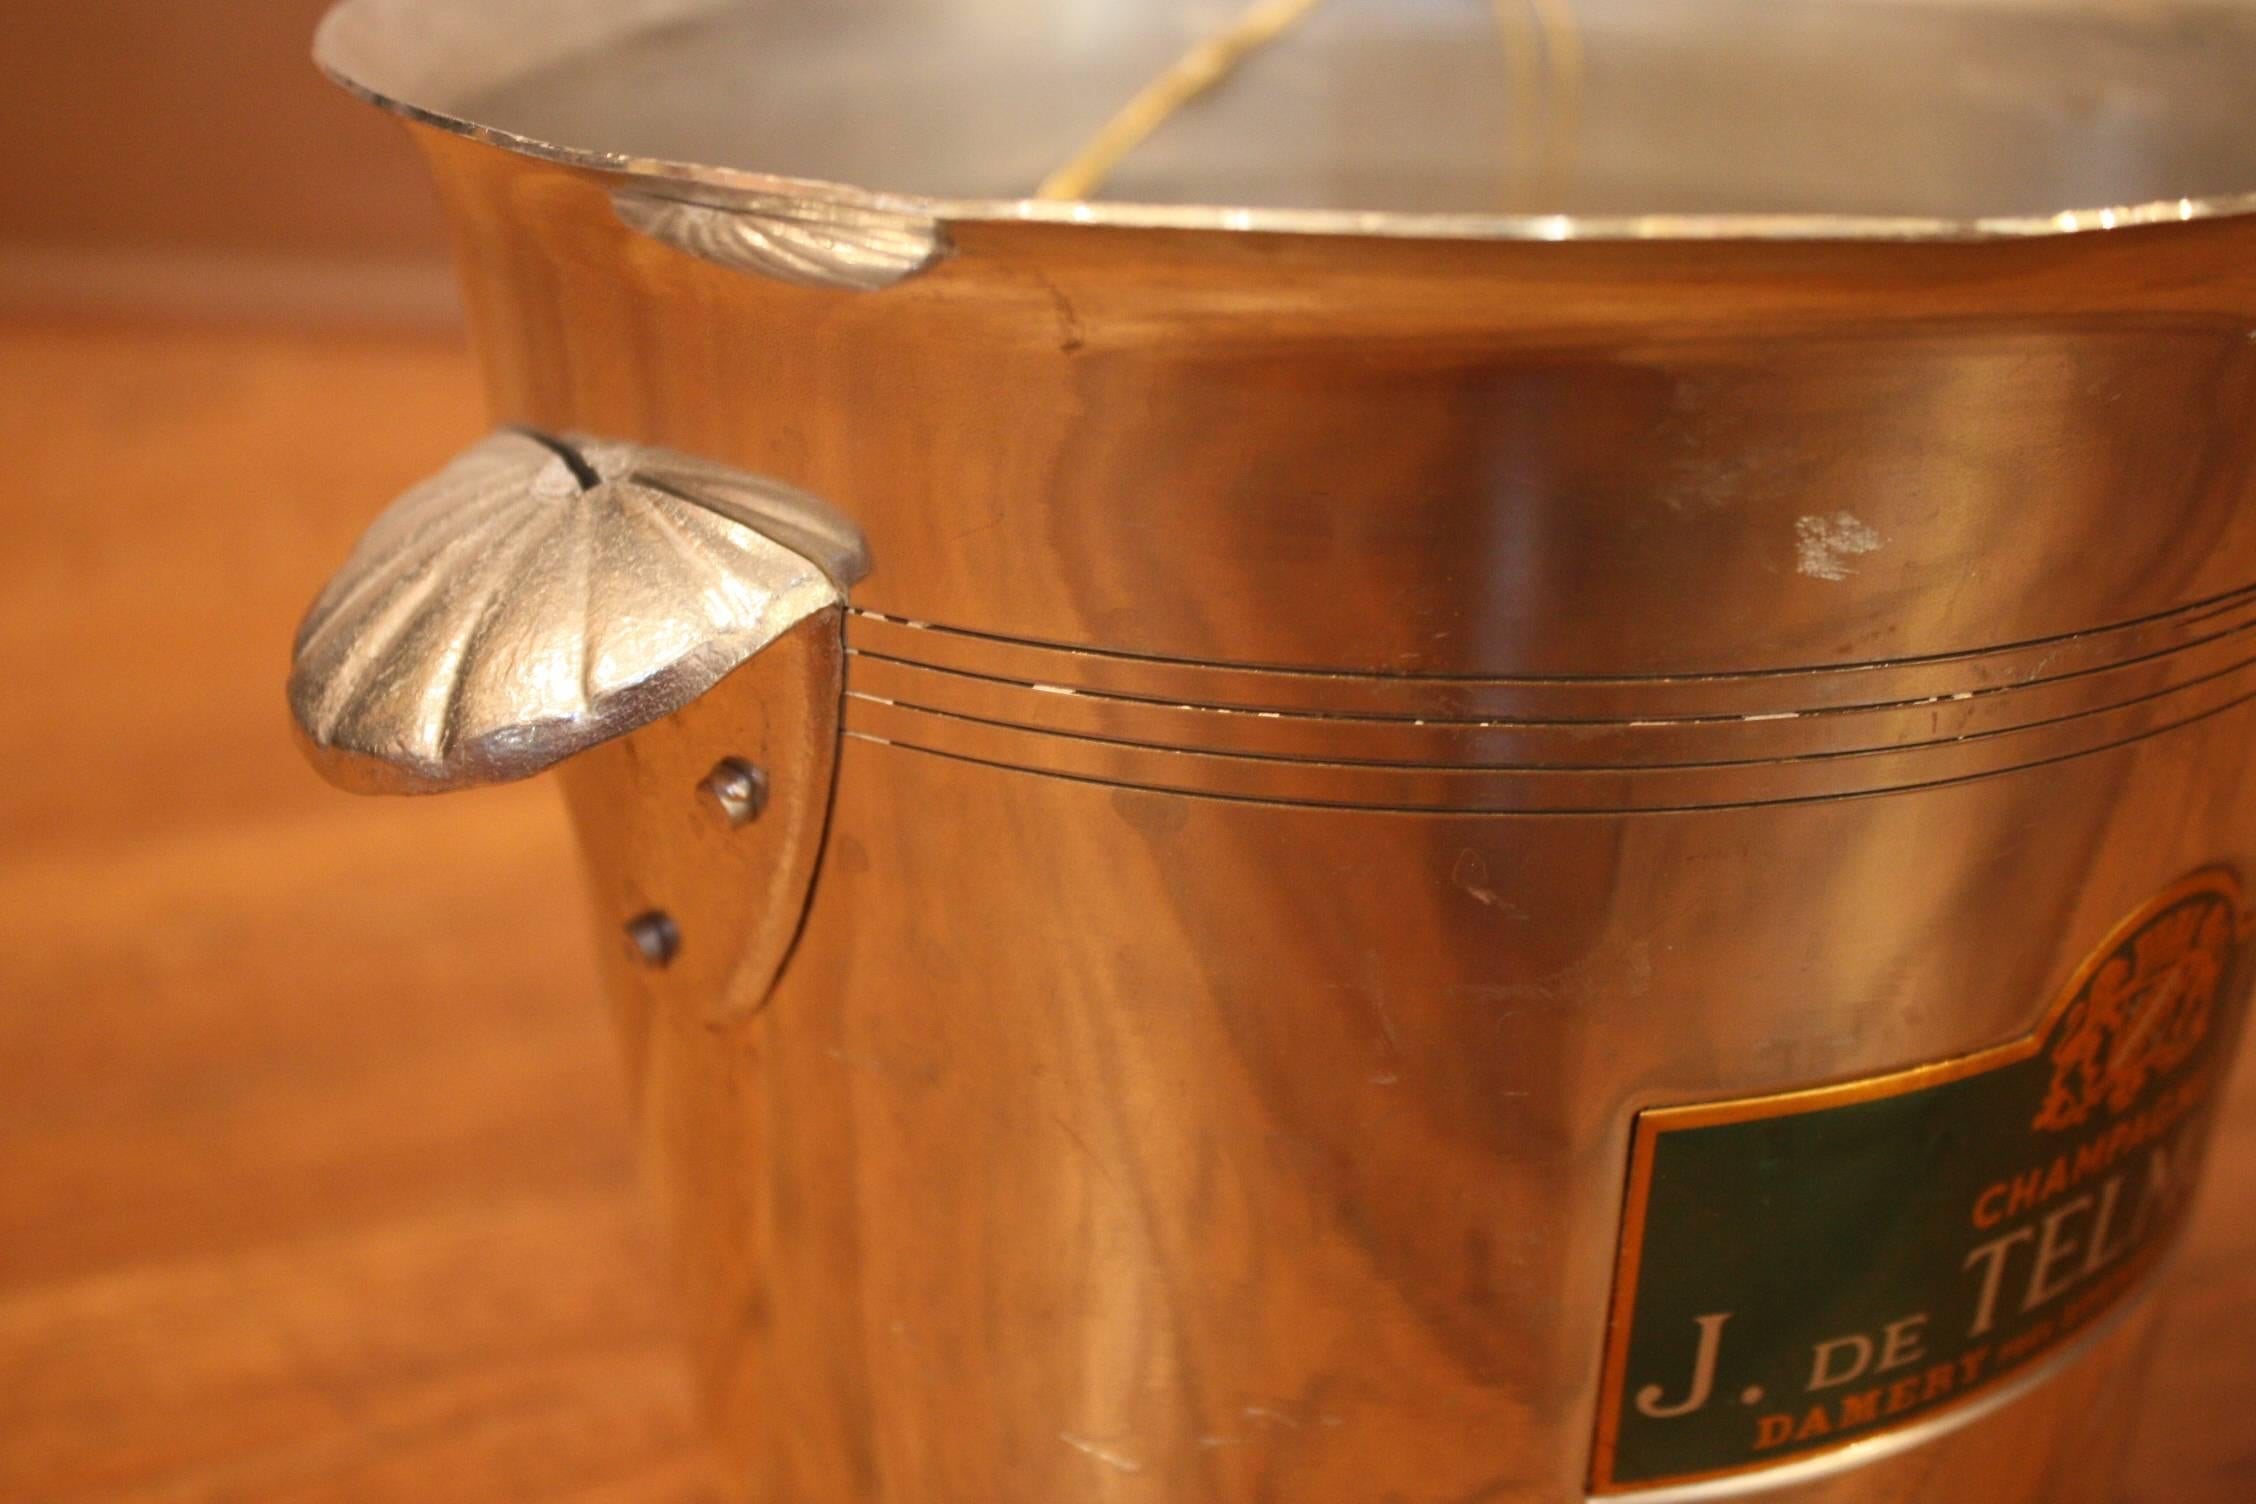 French champagne cooler ice bucket with J. De Telmont label. A Classic piece of French barware to toast any occasion.